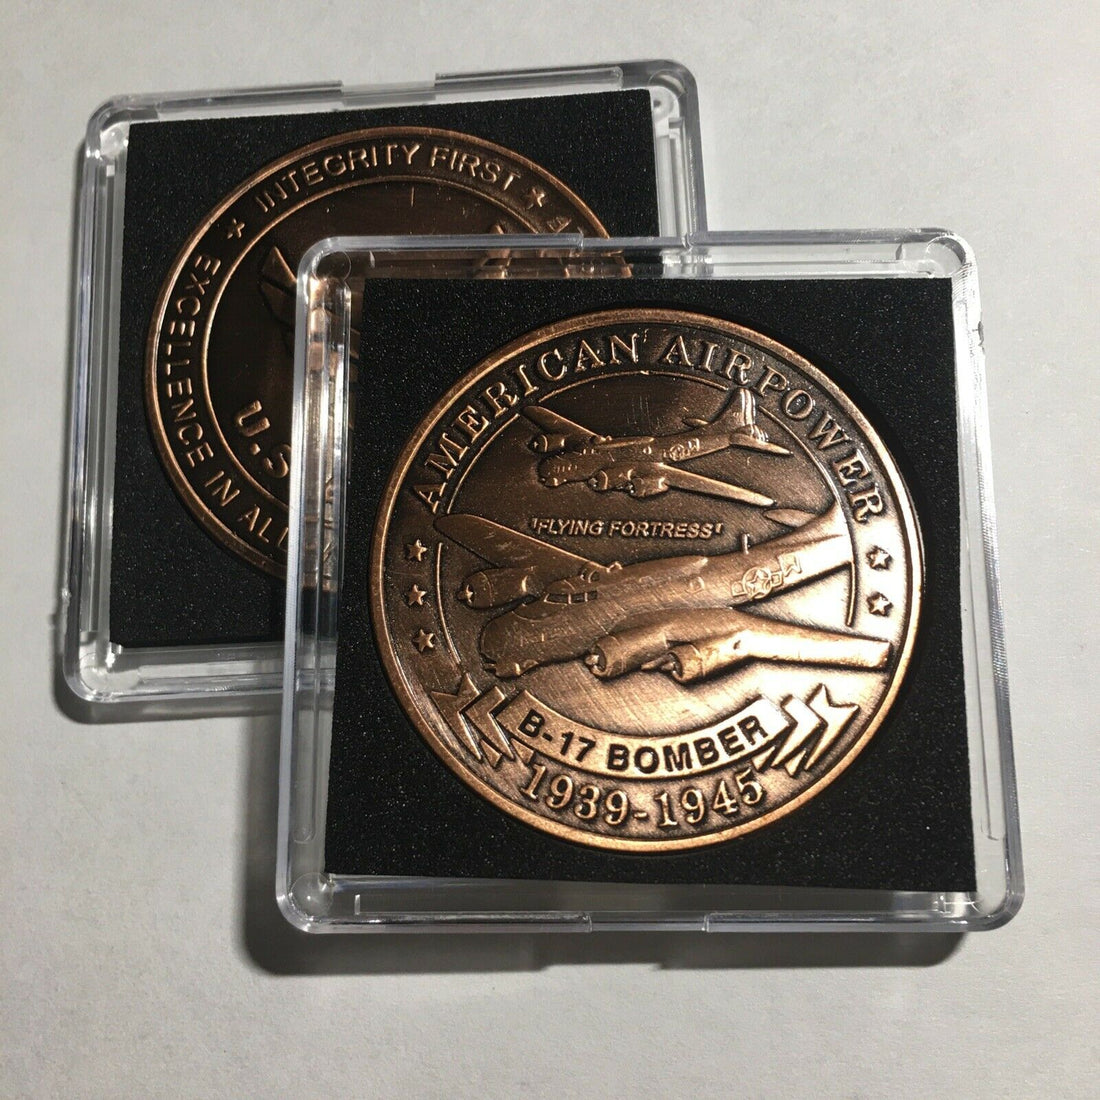 WW2 USAF B-17 "FLYING FORTRESS" Challenge Coin w/Case FREE SHIPPING USA